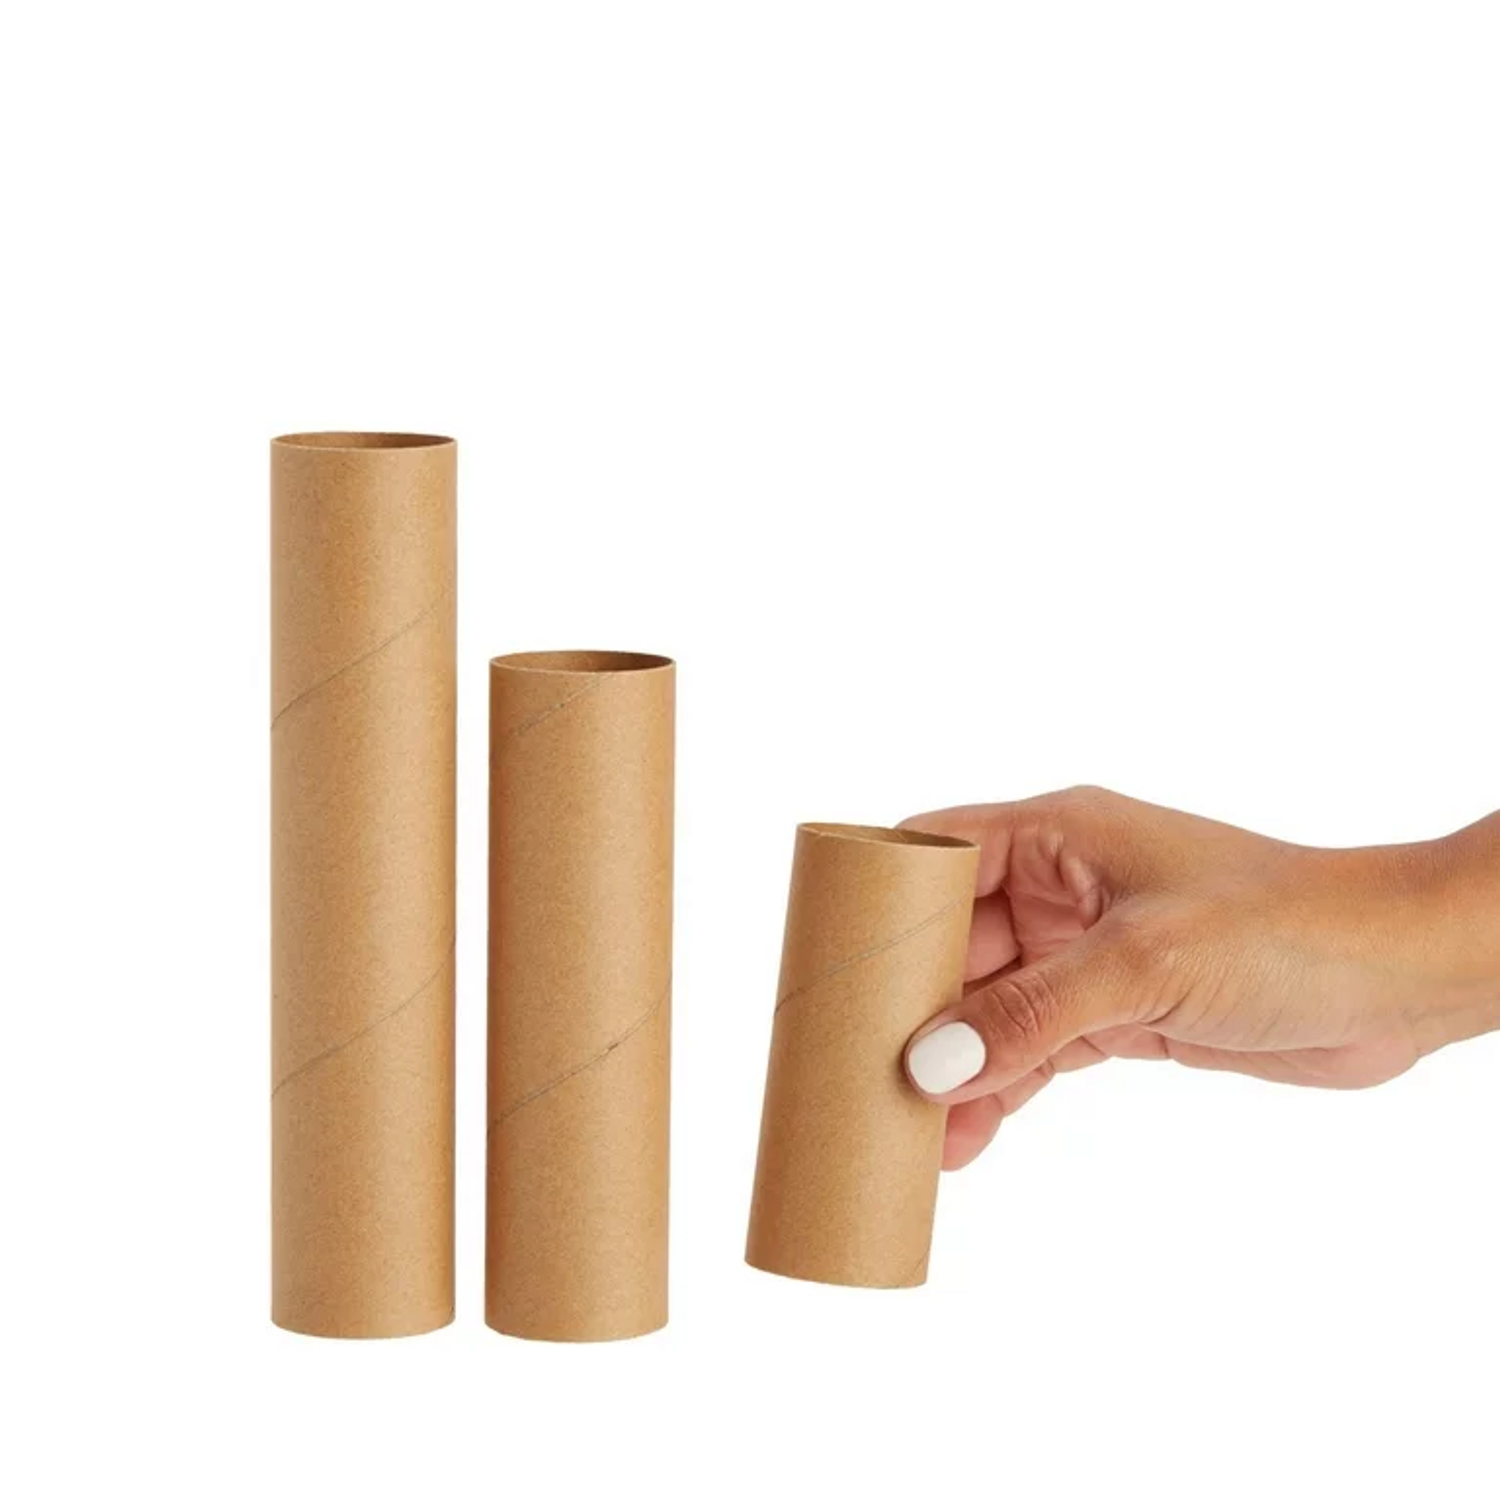 Eco Friendly Cardboard Roll Core Toilet Rolls Paper Tubes